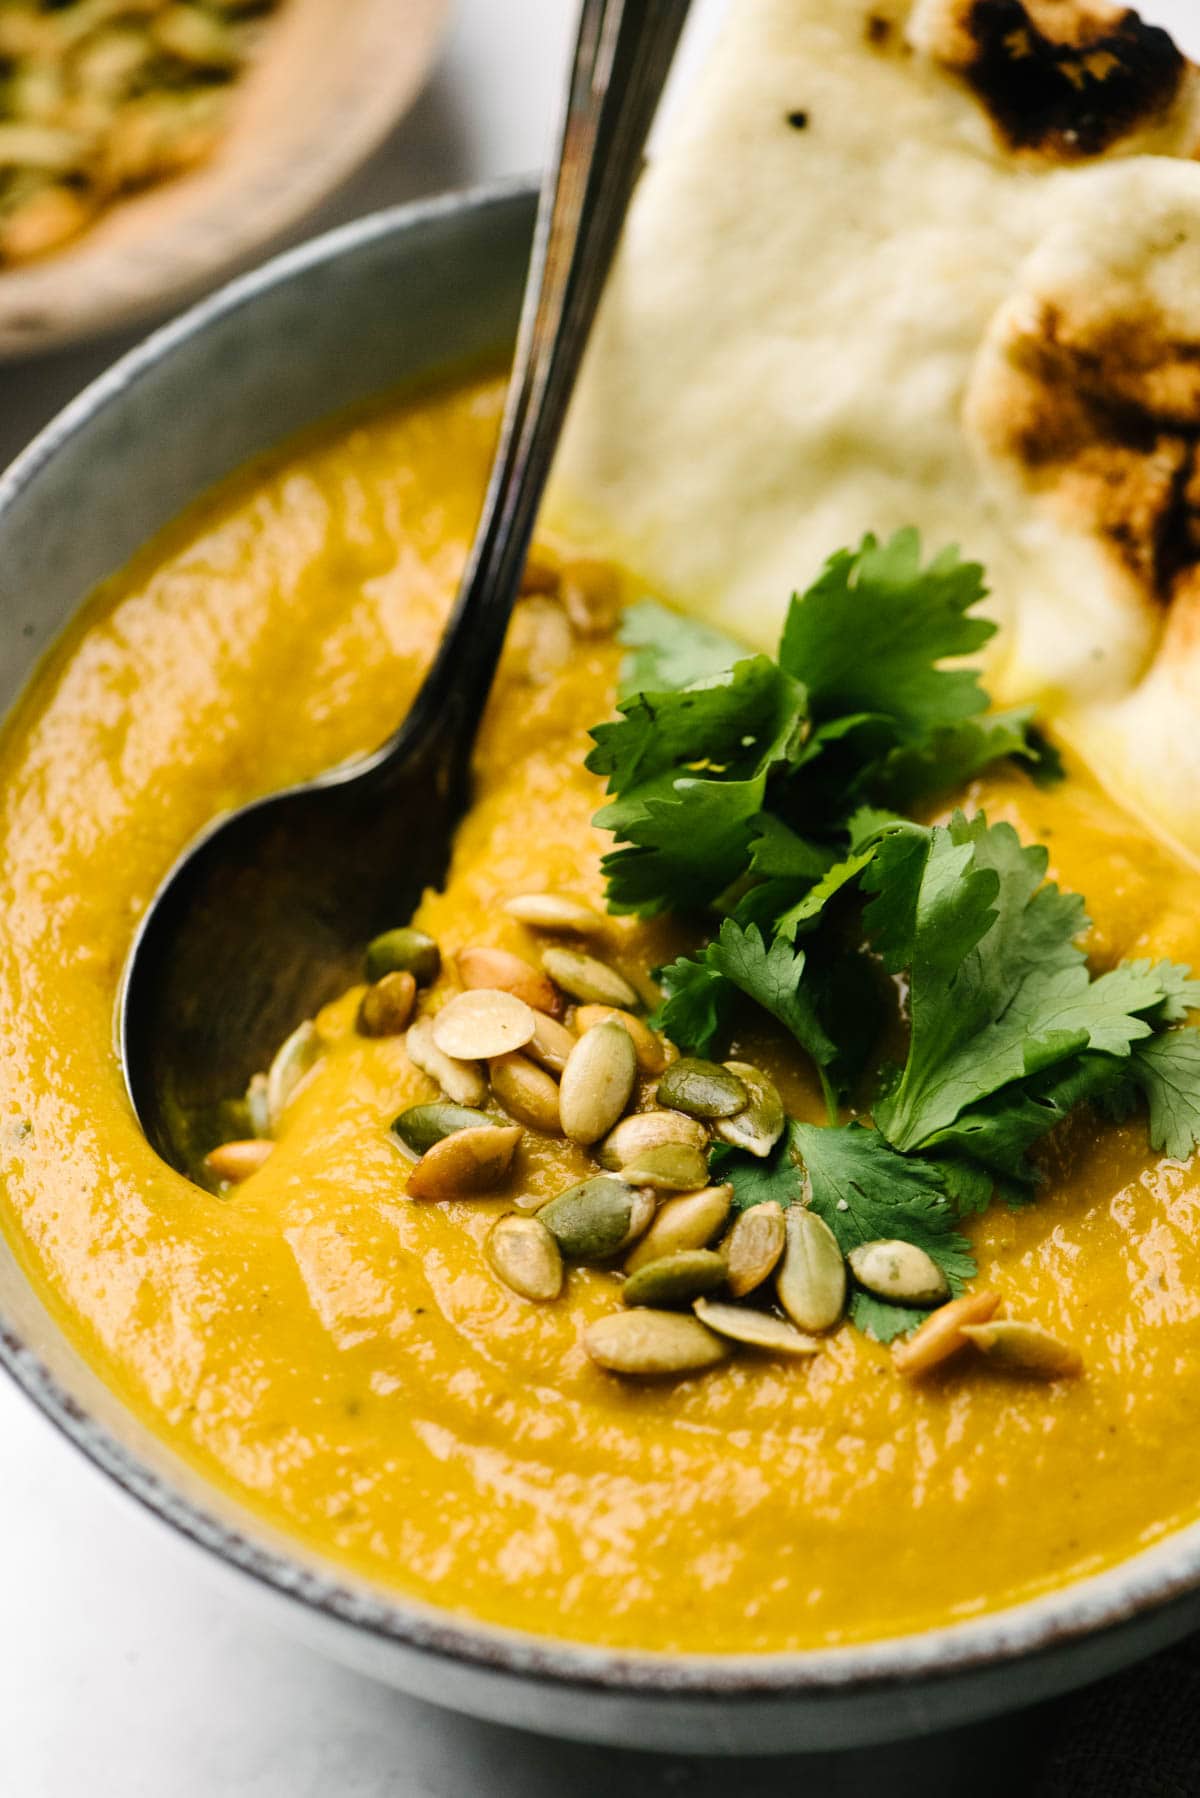 Side view, a spoon tucked into a bowl of pumpkin soup garnished with peptias and fresh cilantro.